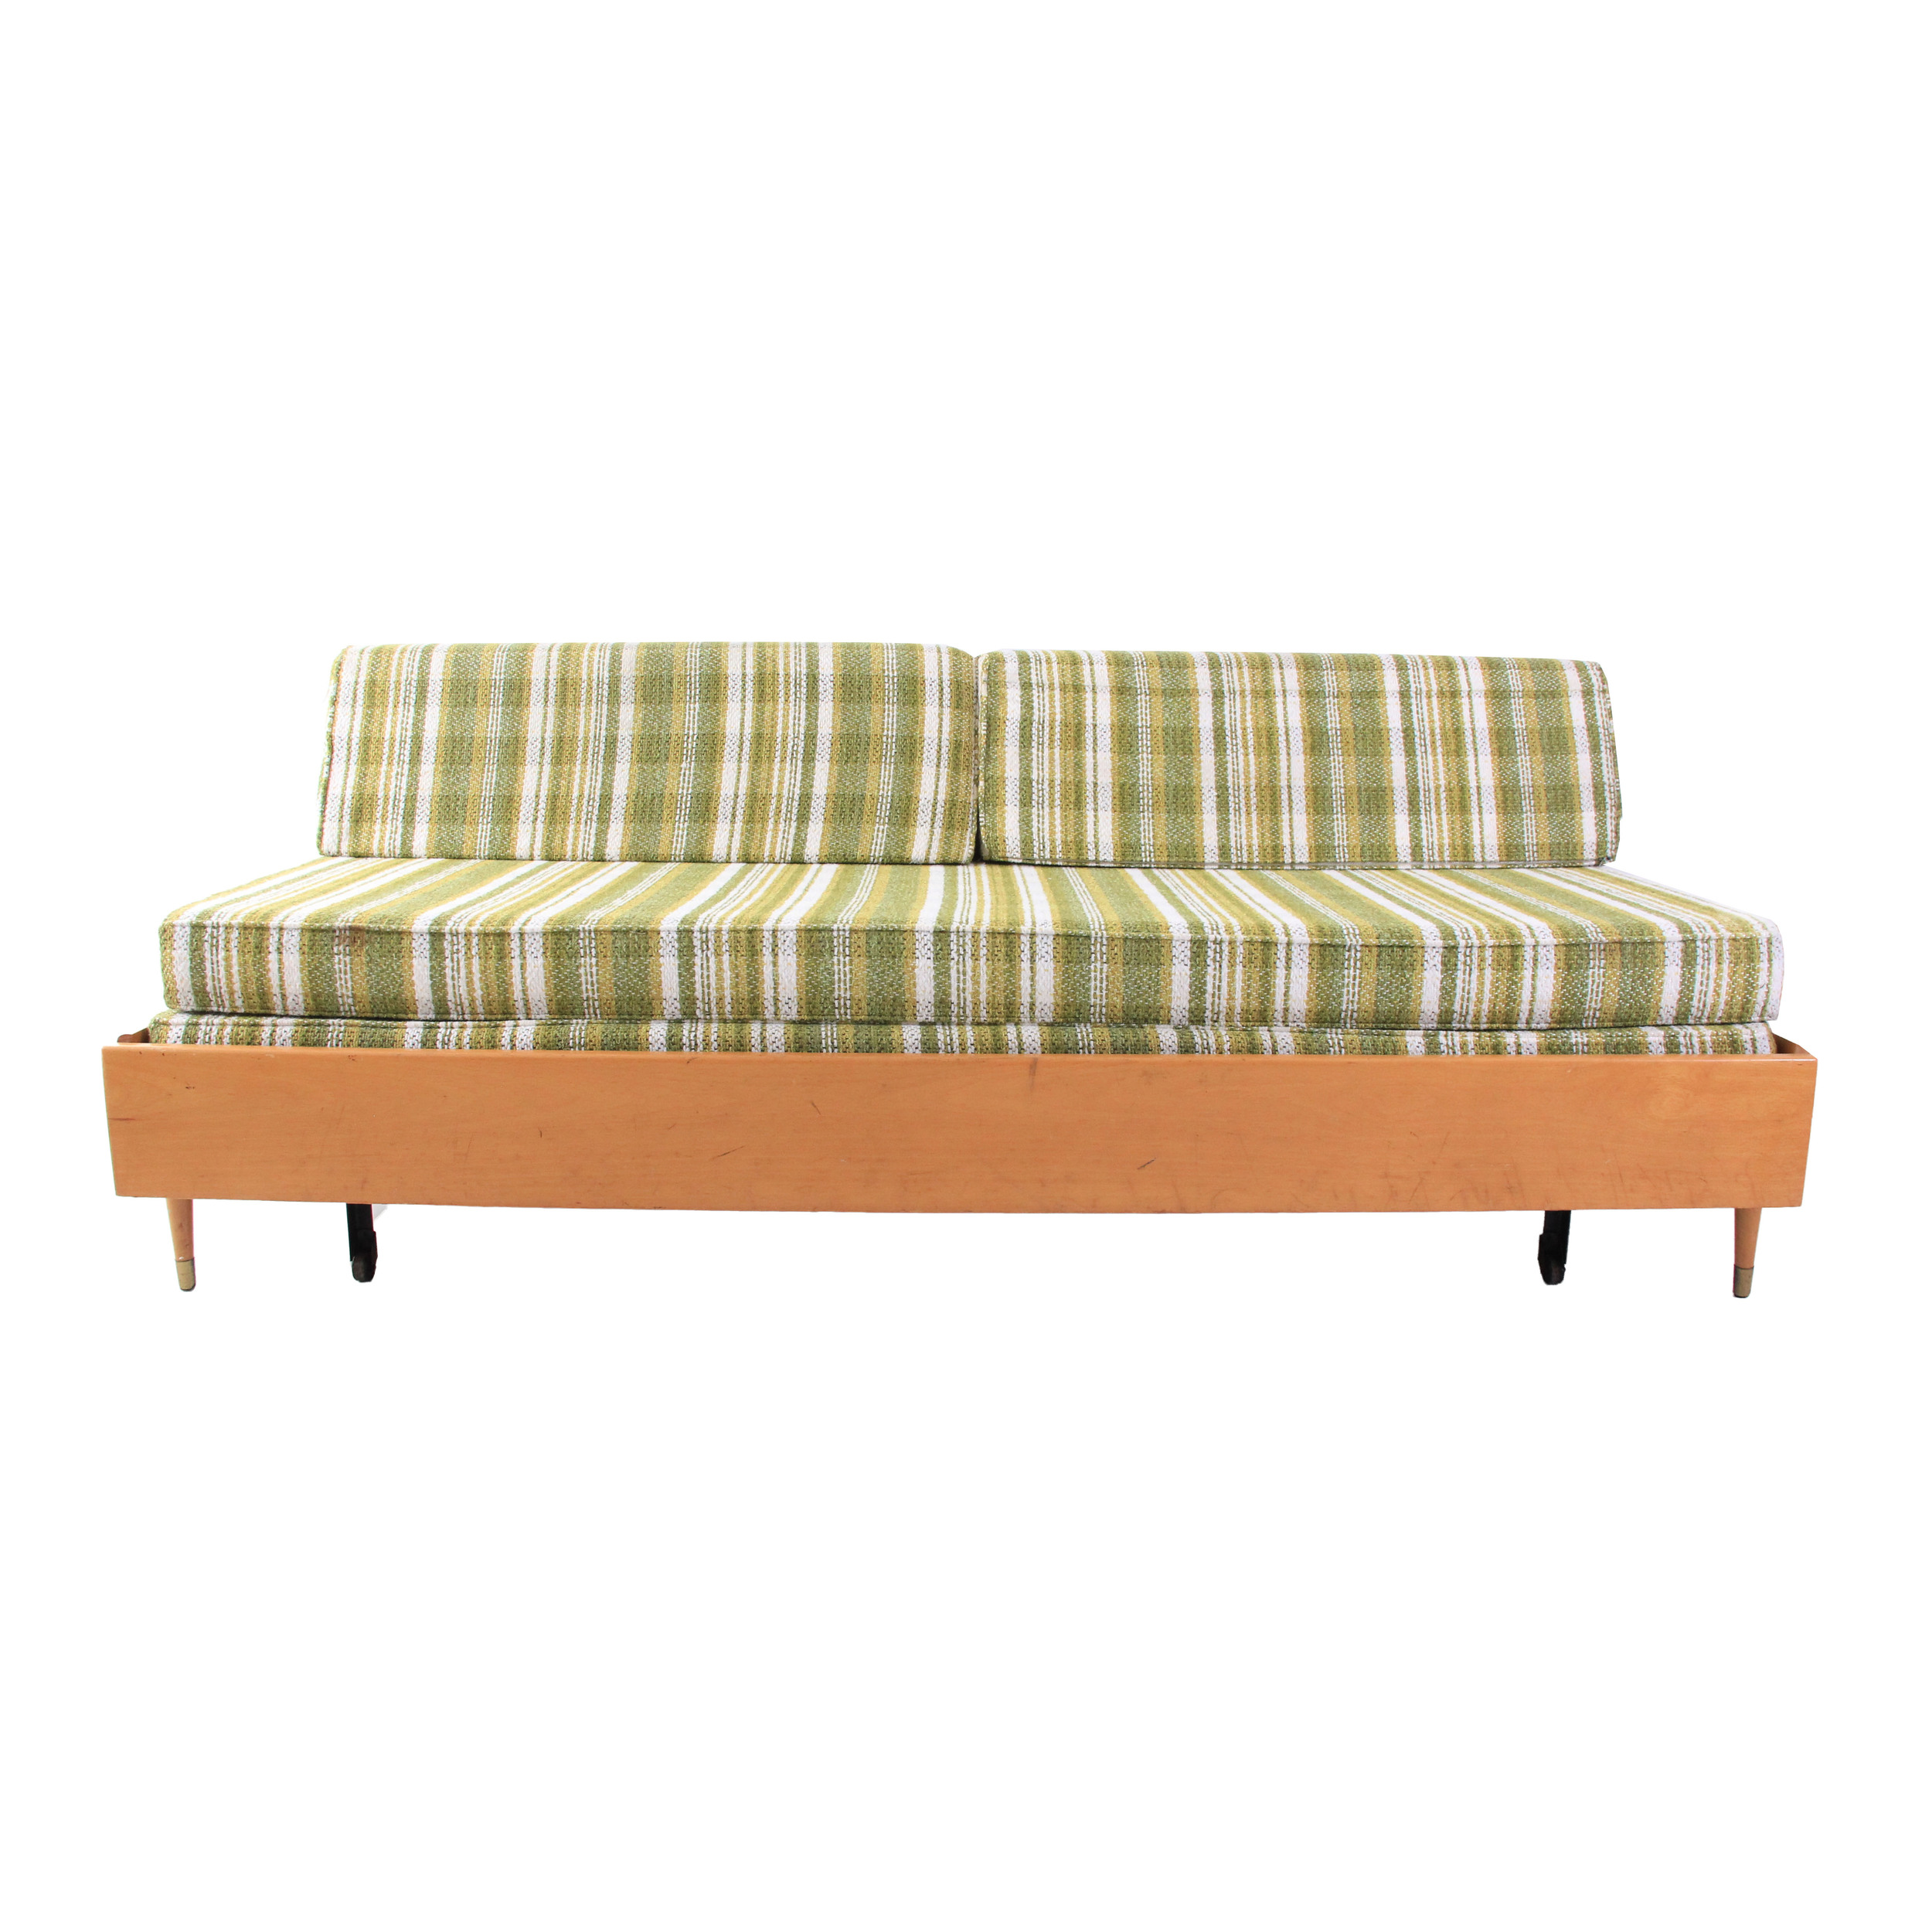 Vintage Mid Century Modern Trundle Daybed Sofa